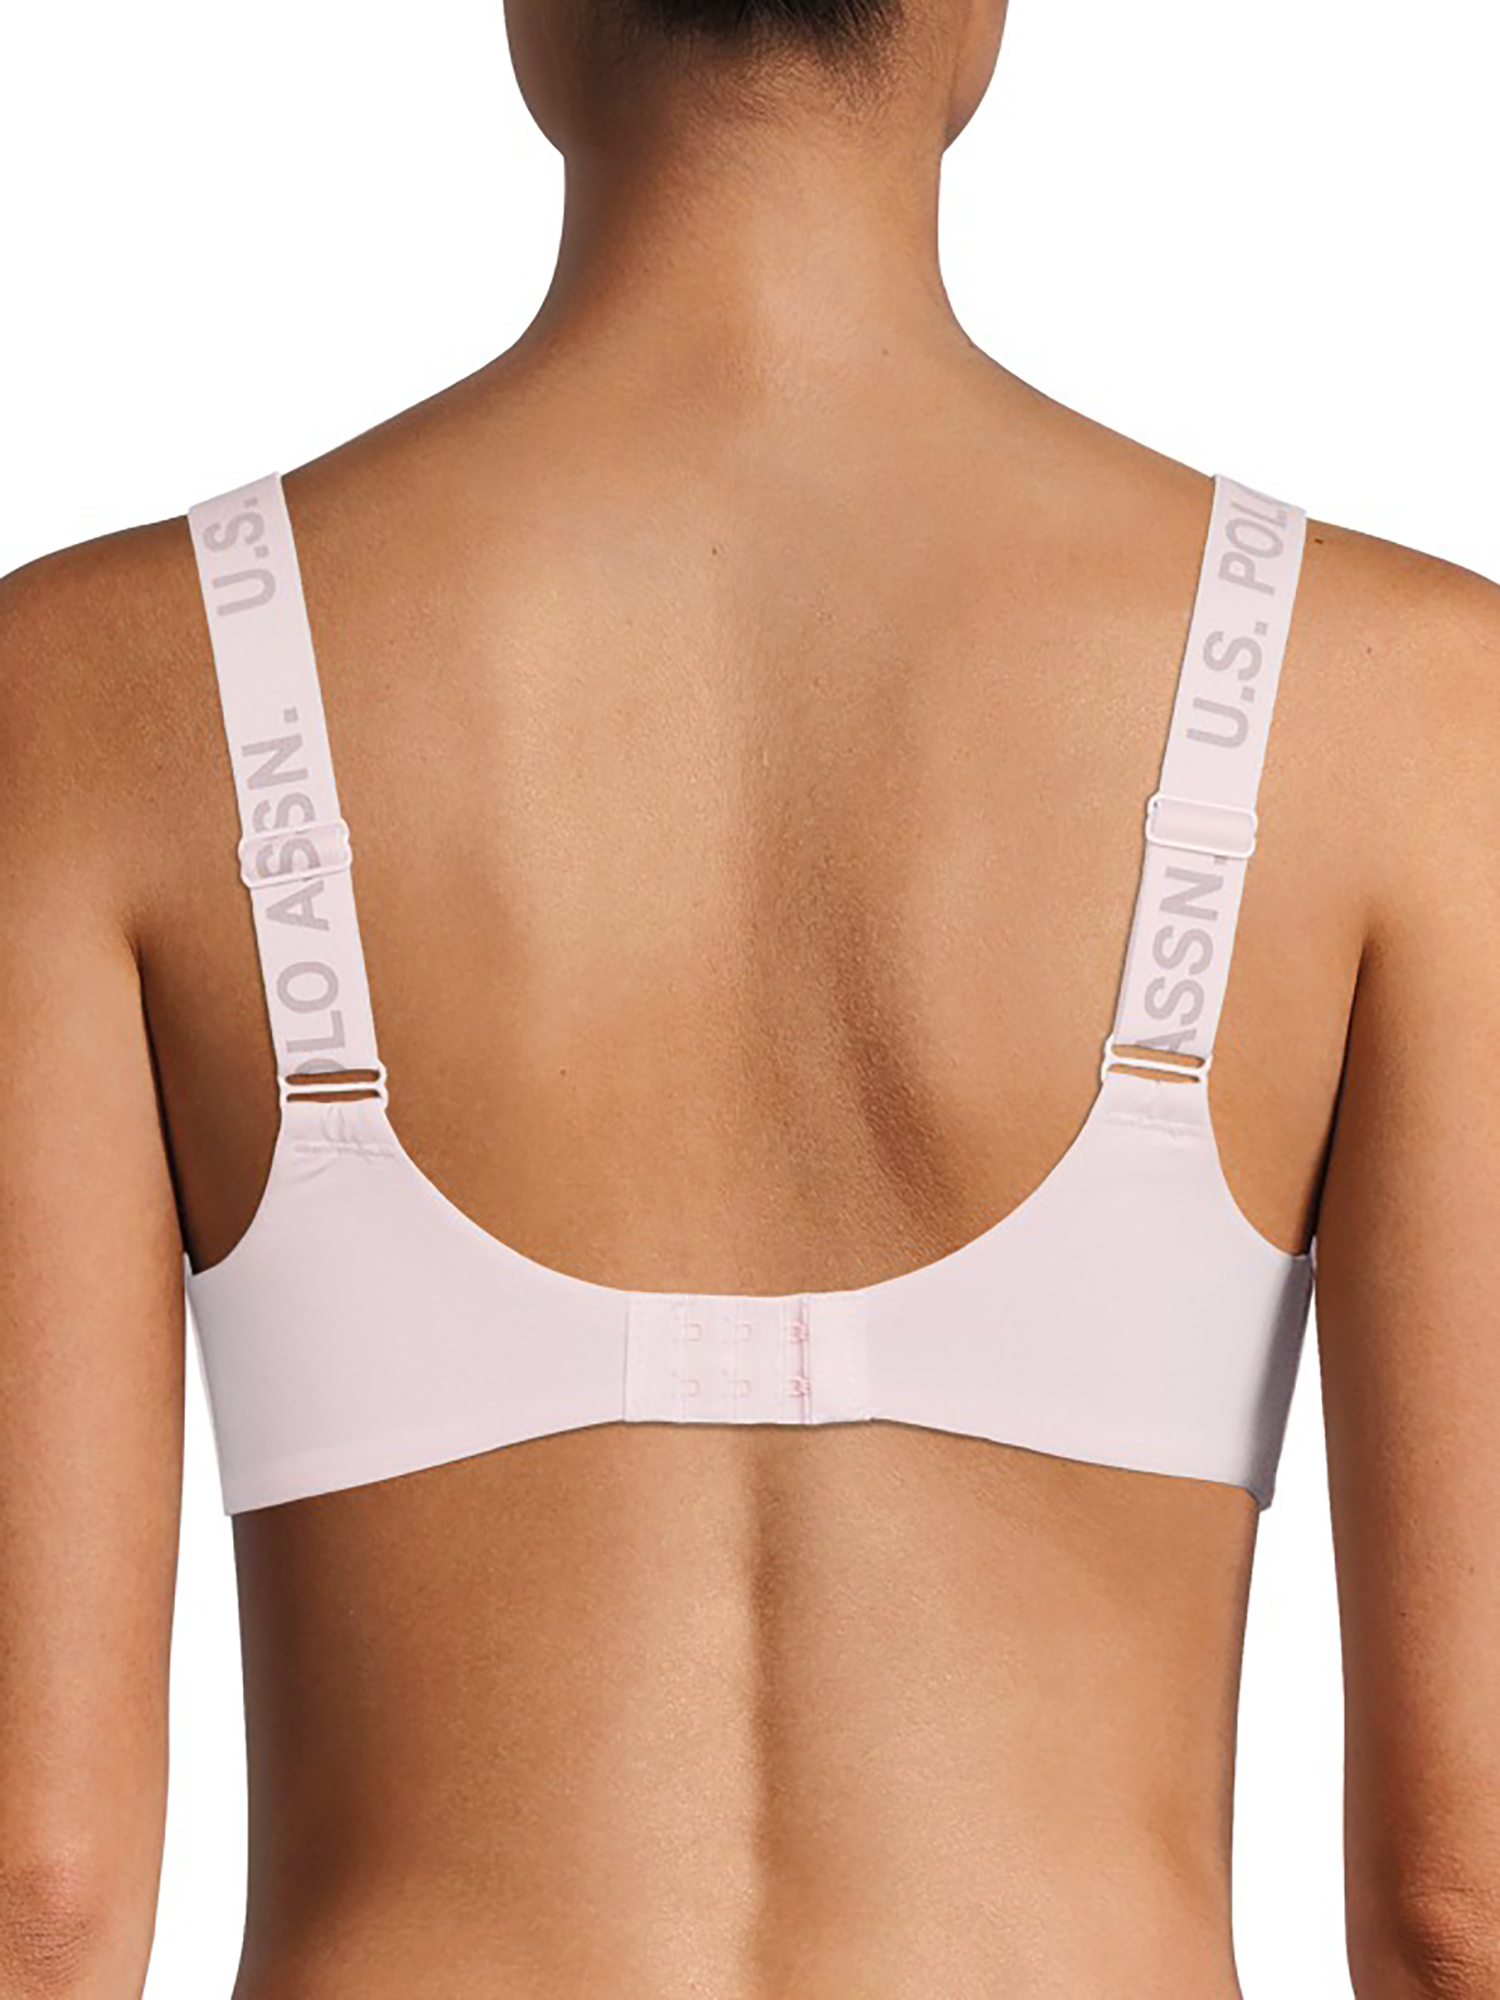 U.S. Polo Assn. Women's Wirefree Push Up Bra, 2-Pack - image 3 of 4